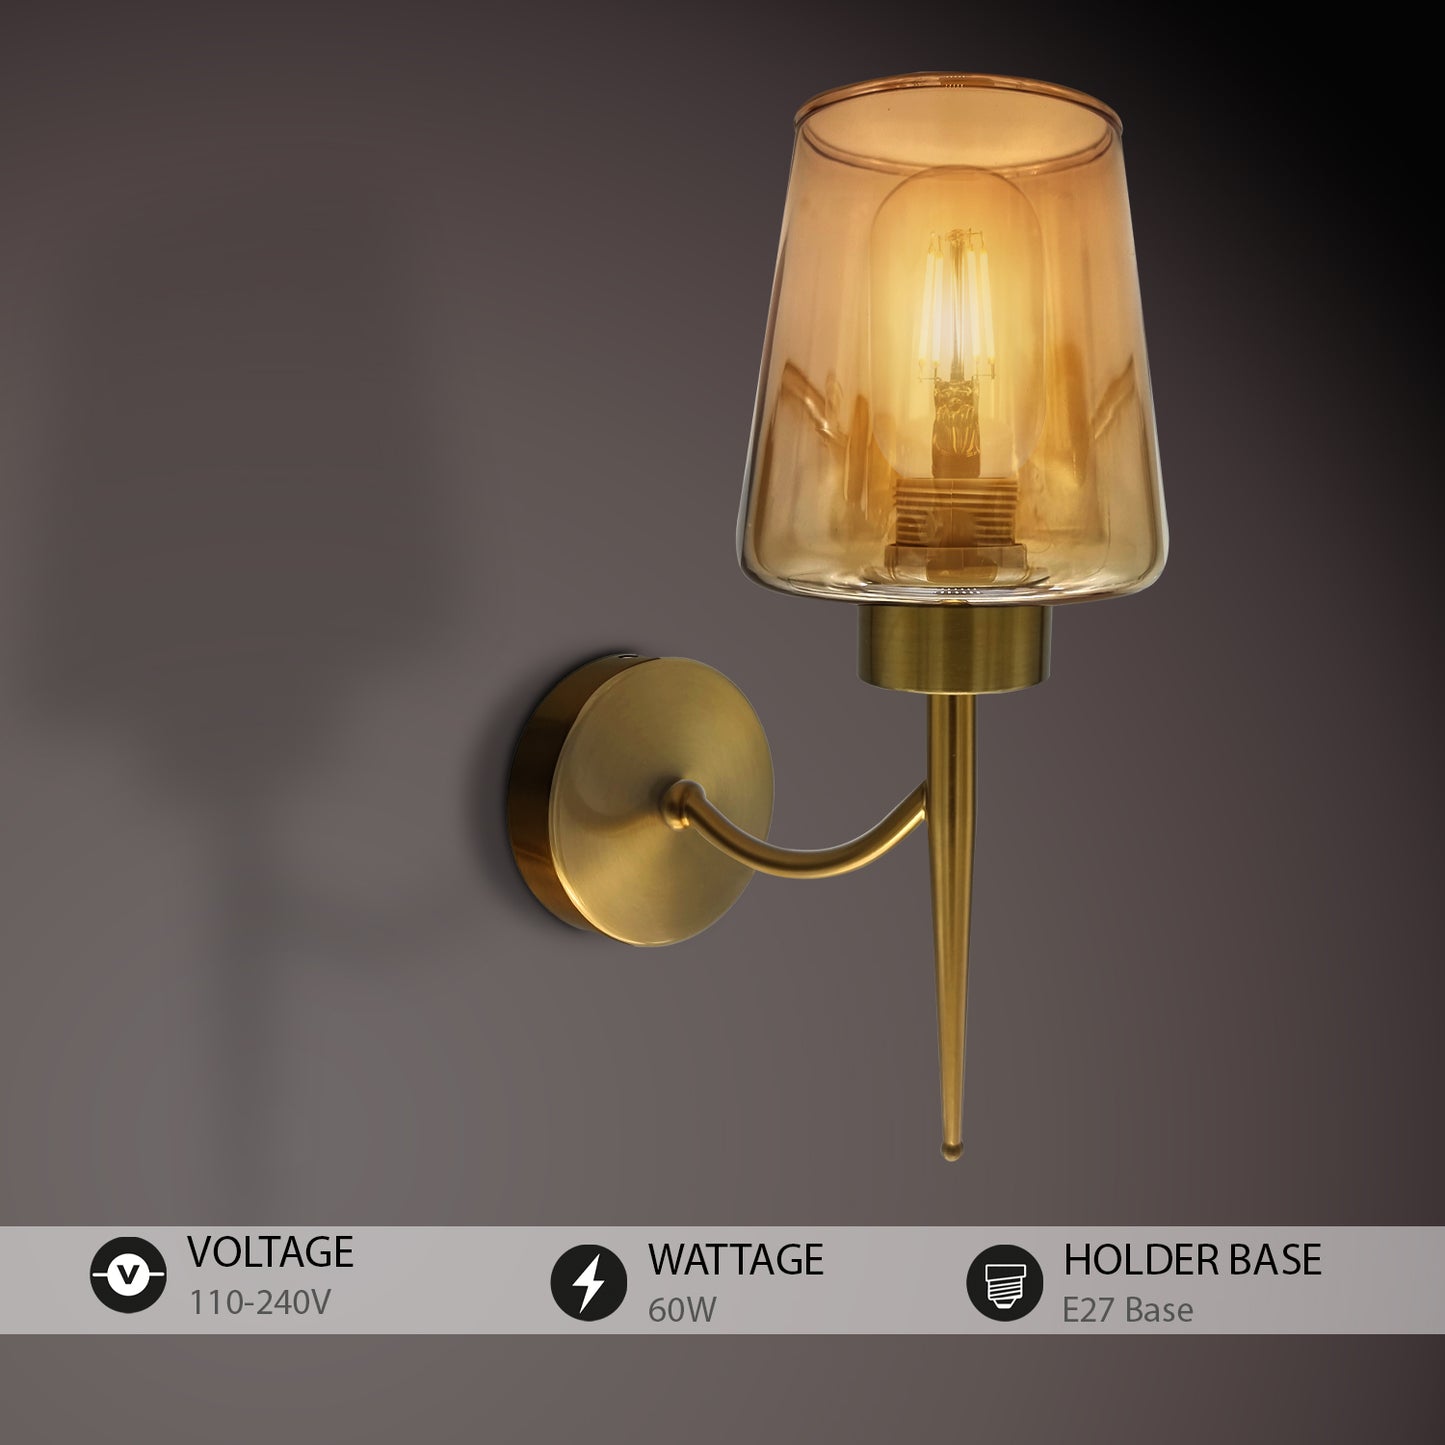 Modern Amber Glass Plate Wall Light with Bell/Mug Shape Lampshade – Ideal for Bedrooms, Hallways, Lounge, Kitchens, and Chic Bar Spaces - Application Image